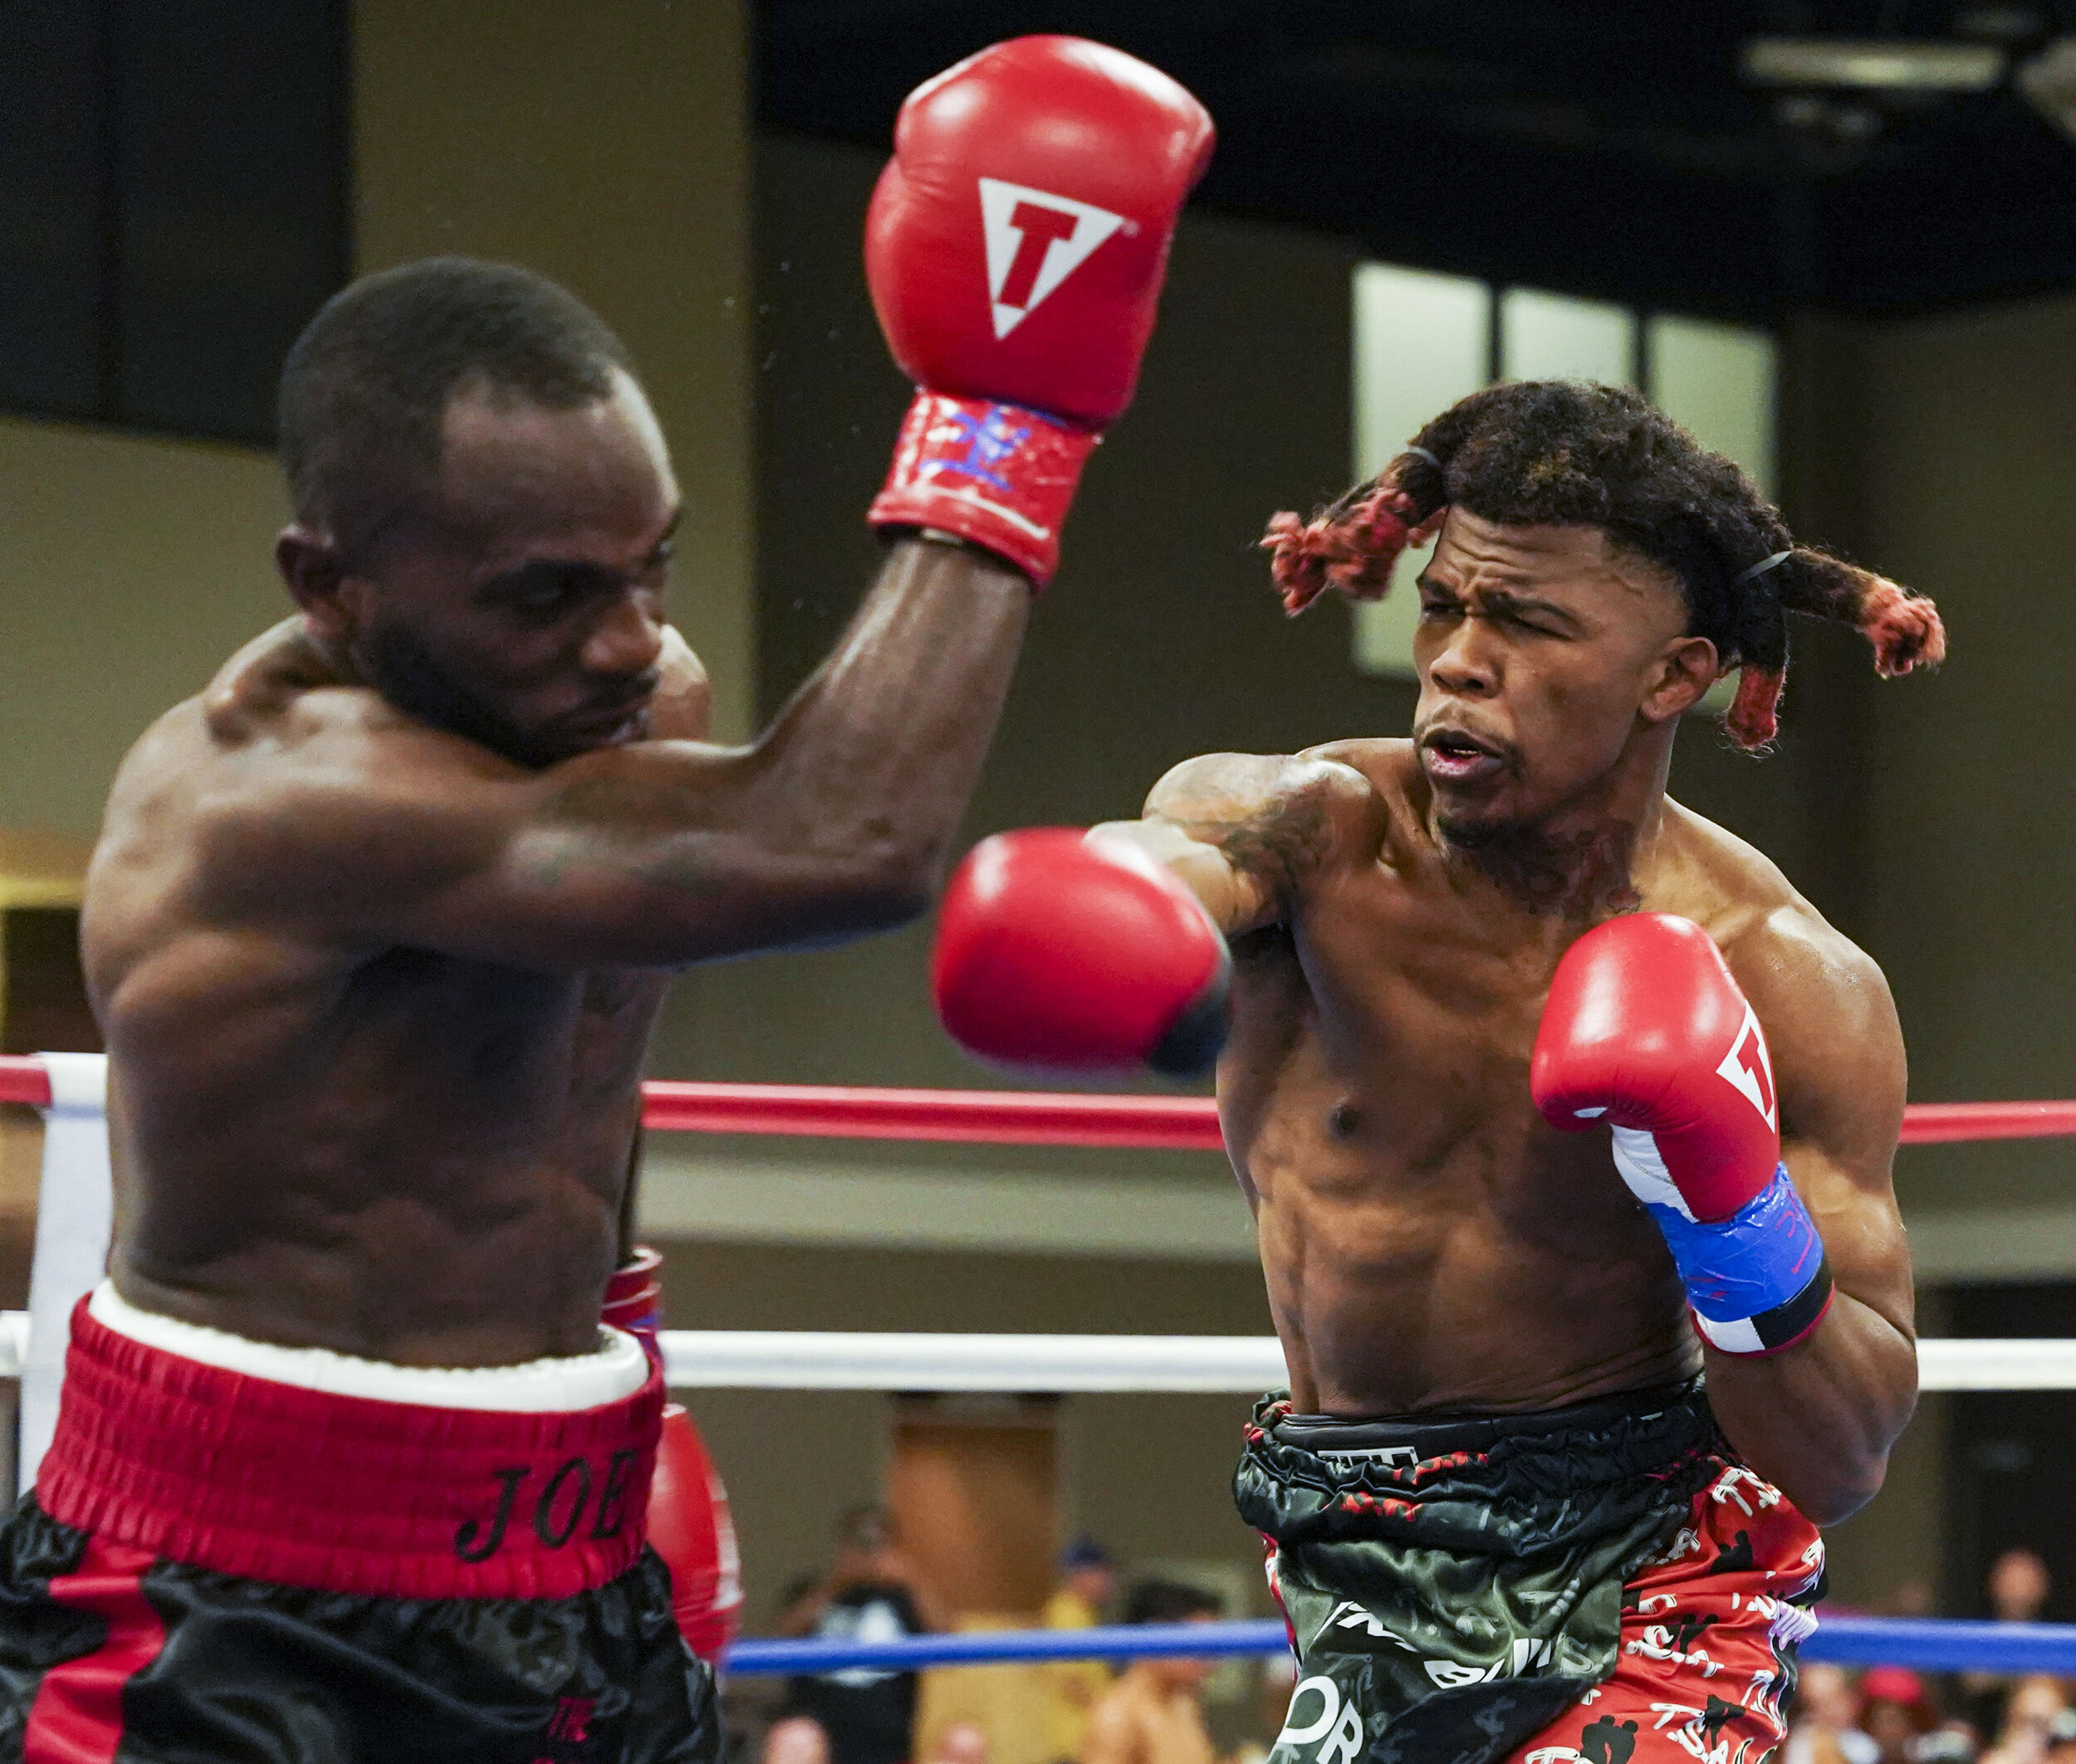  Pachino Hill lands a punch on Jarvis Williams of St Louis during their match at the River Center in Davenport, Saturday, June 19, 2021. 